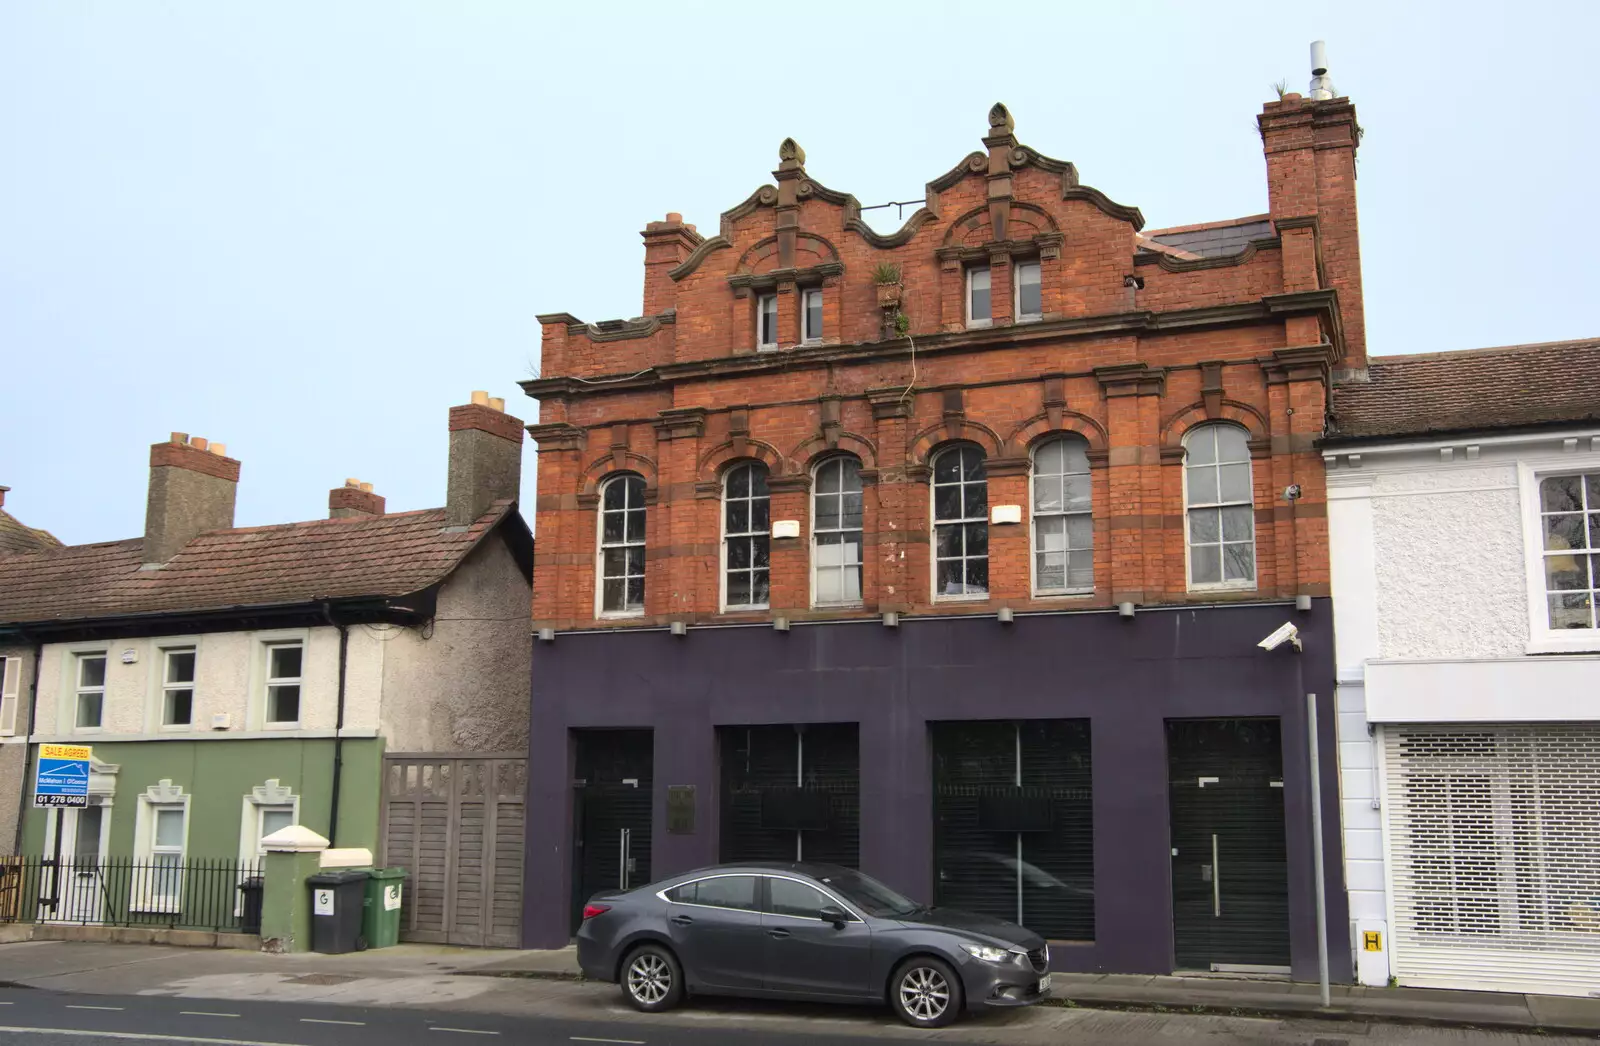 Another fancy building on Rock Road, from The End of the Breffni, Blackrock, Dublin - 18th February 2023